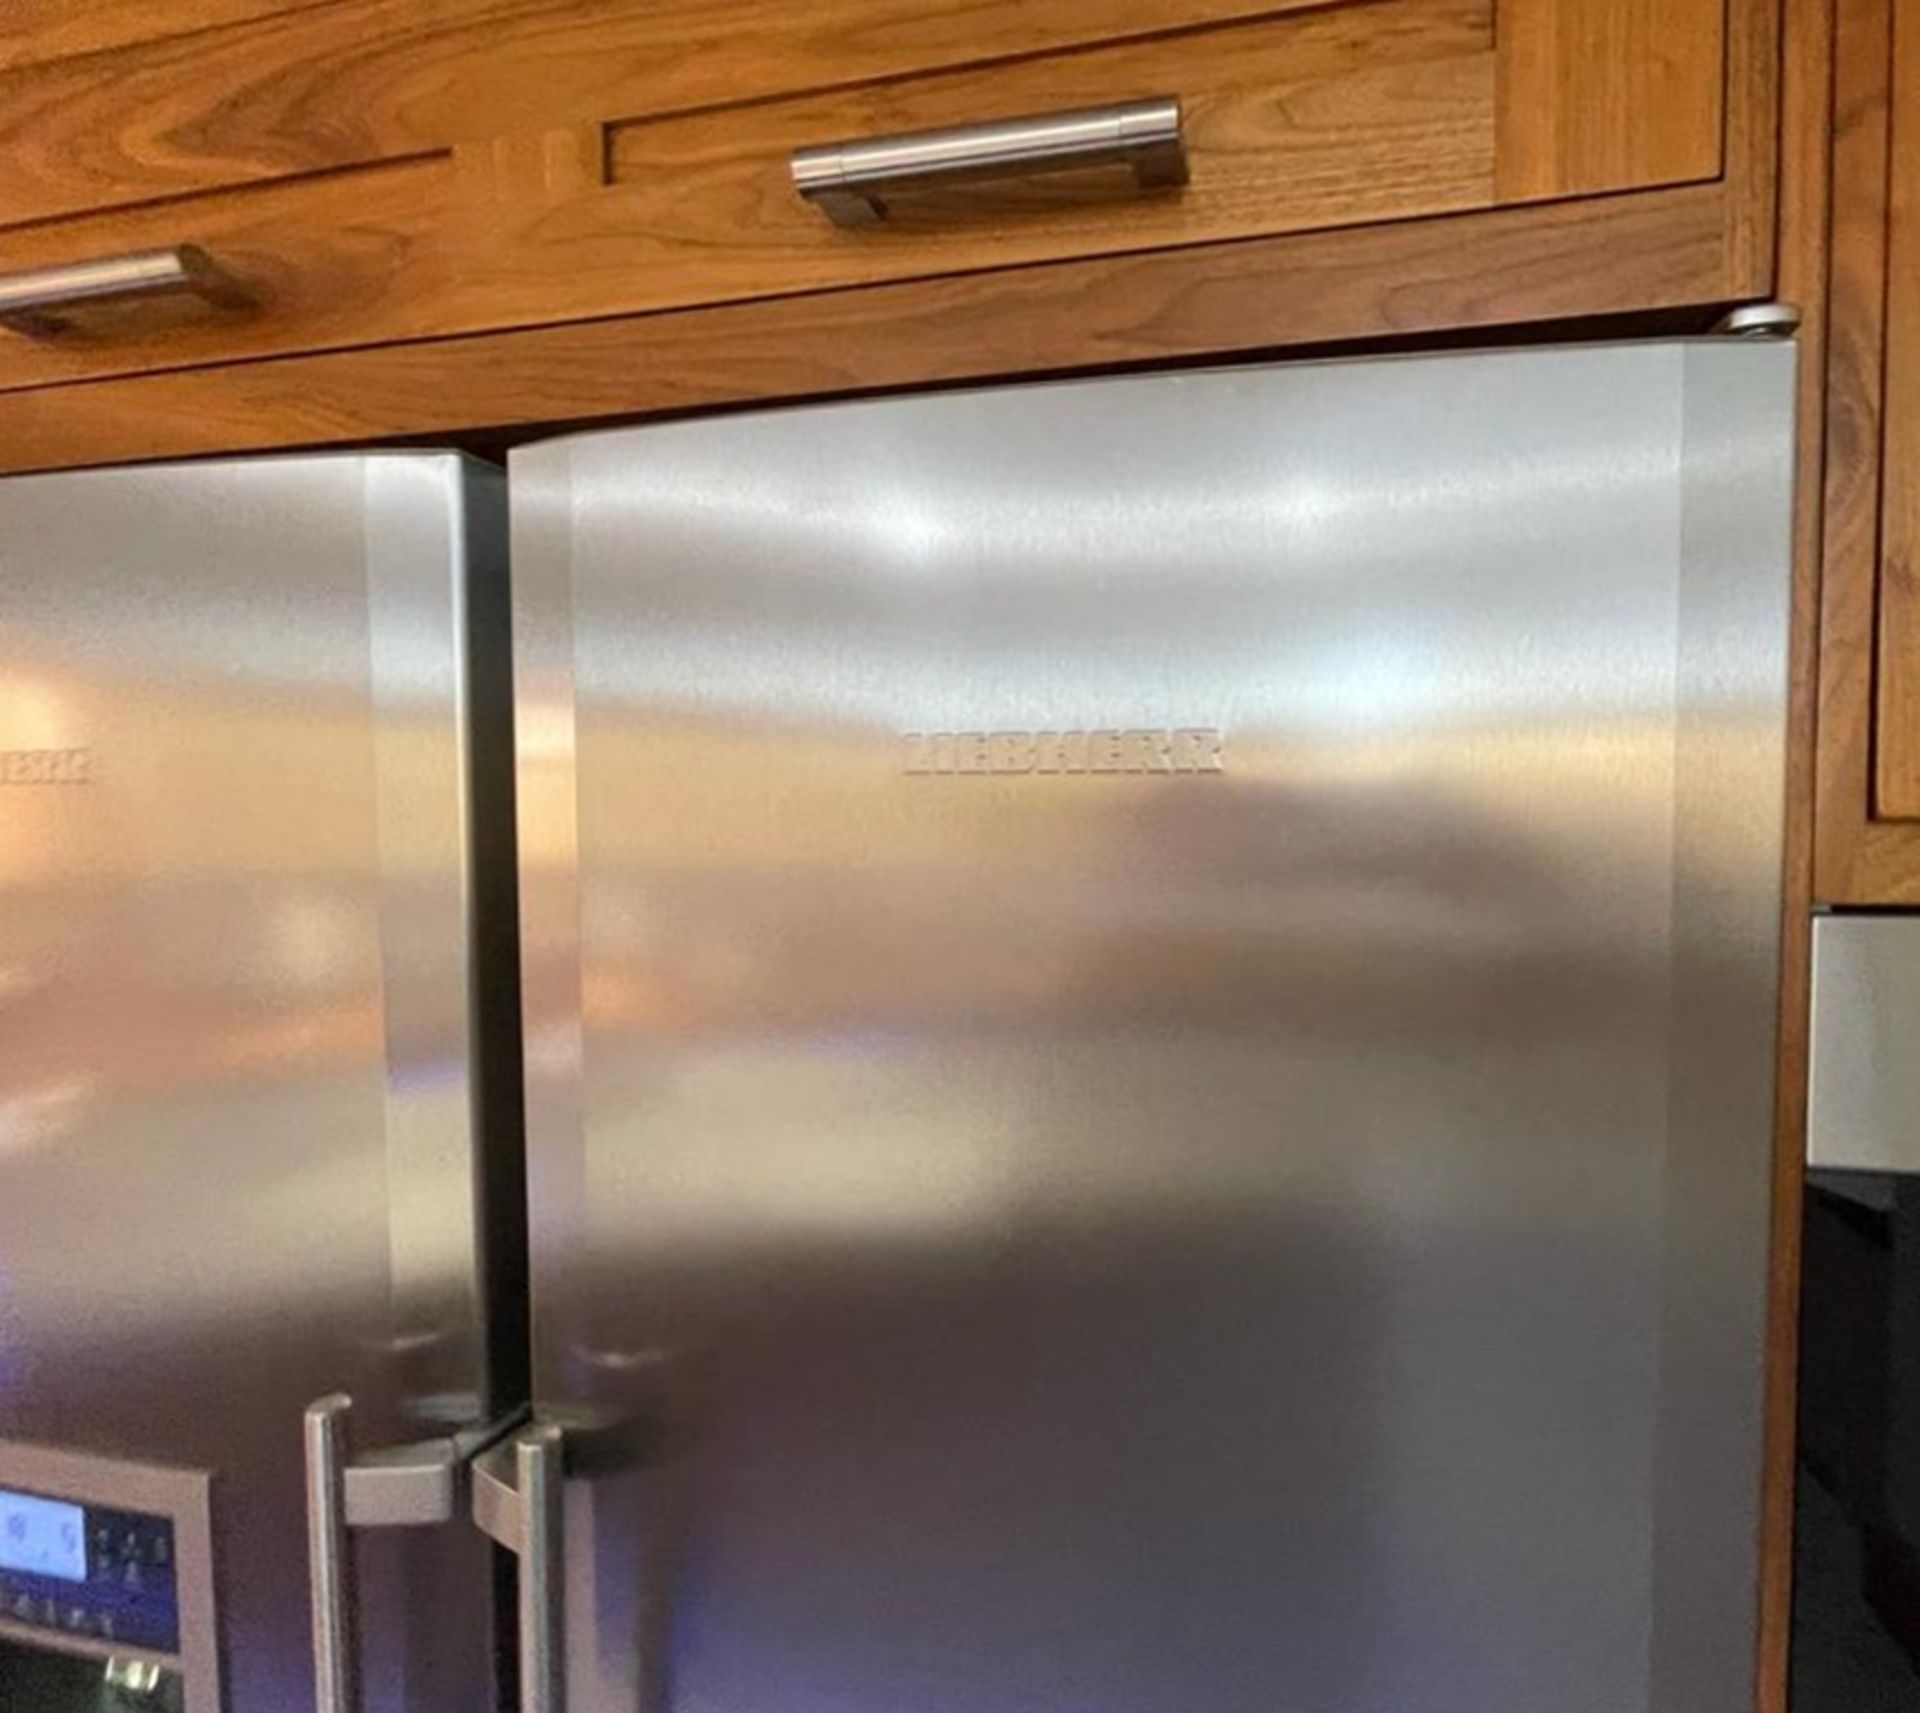 1 x LIEBHERR No-Frost 121cm Side By Side American Style Fridge Freezer - Location: Bolton BL6 - Image 11 of 11